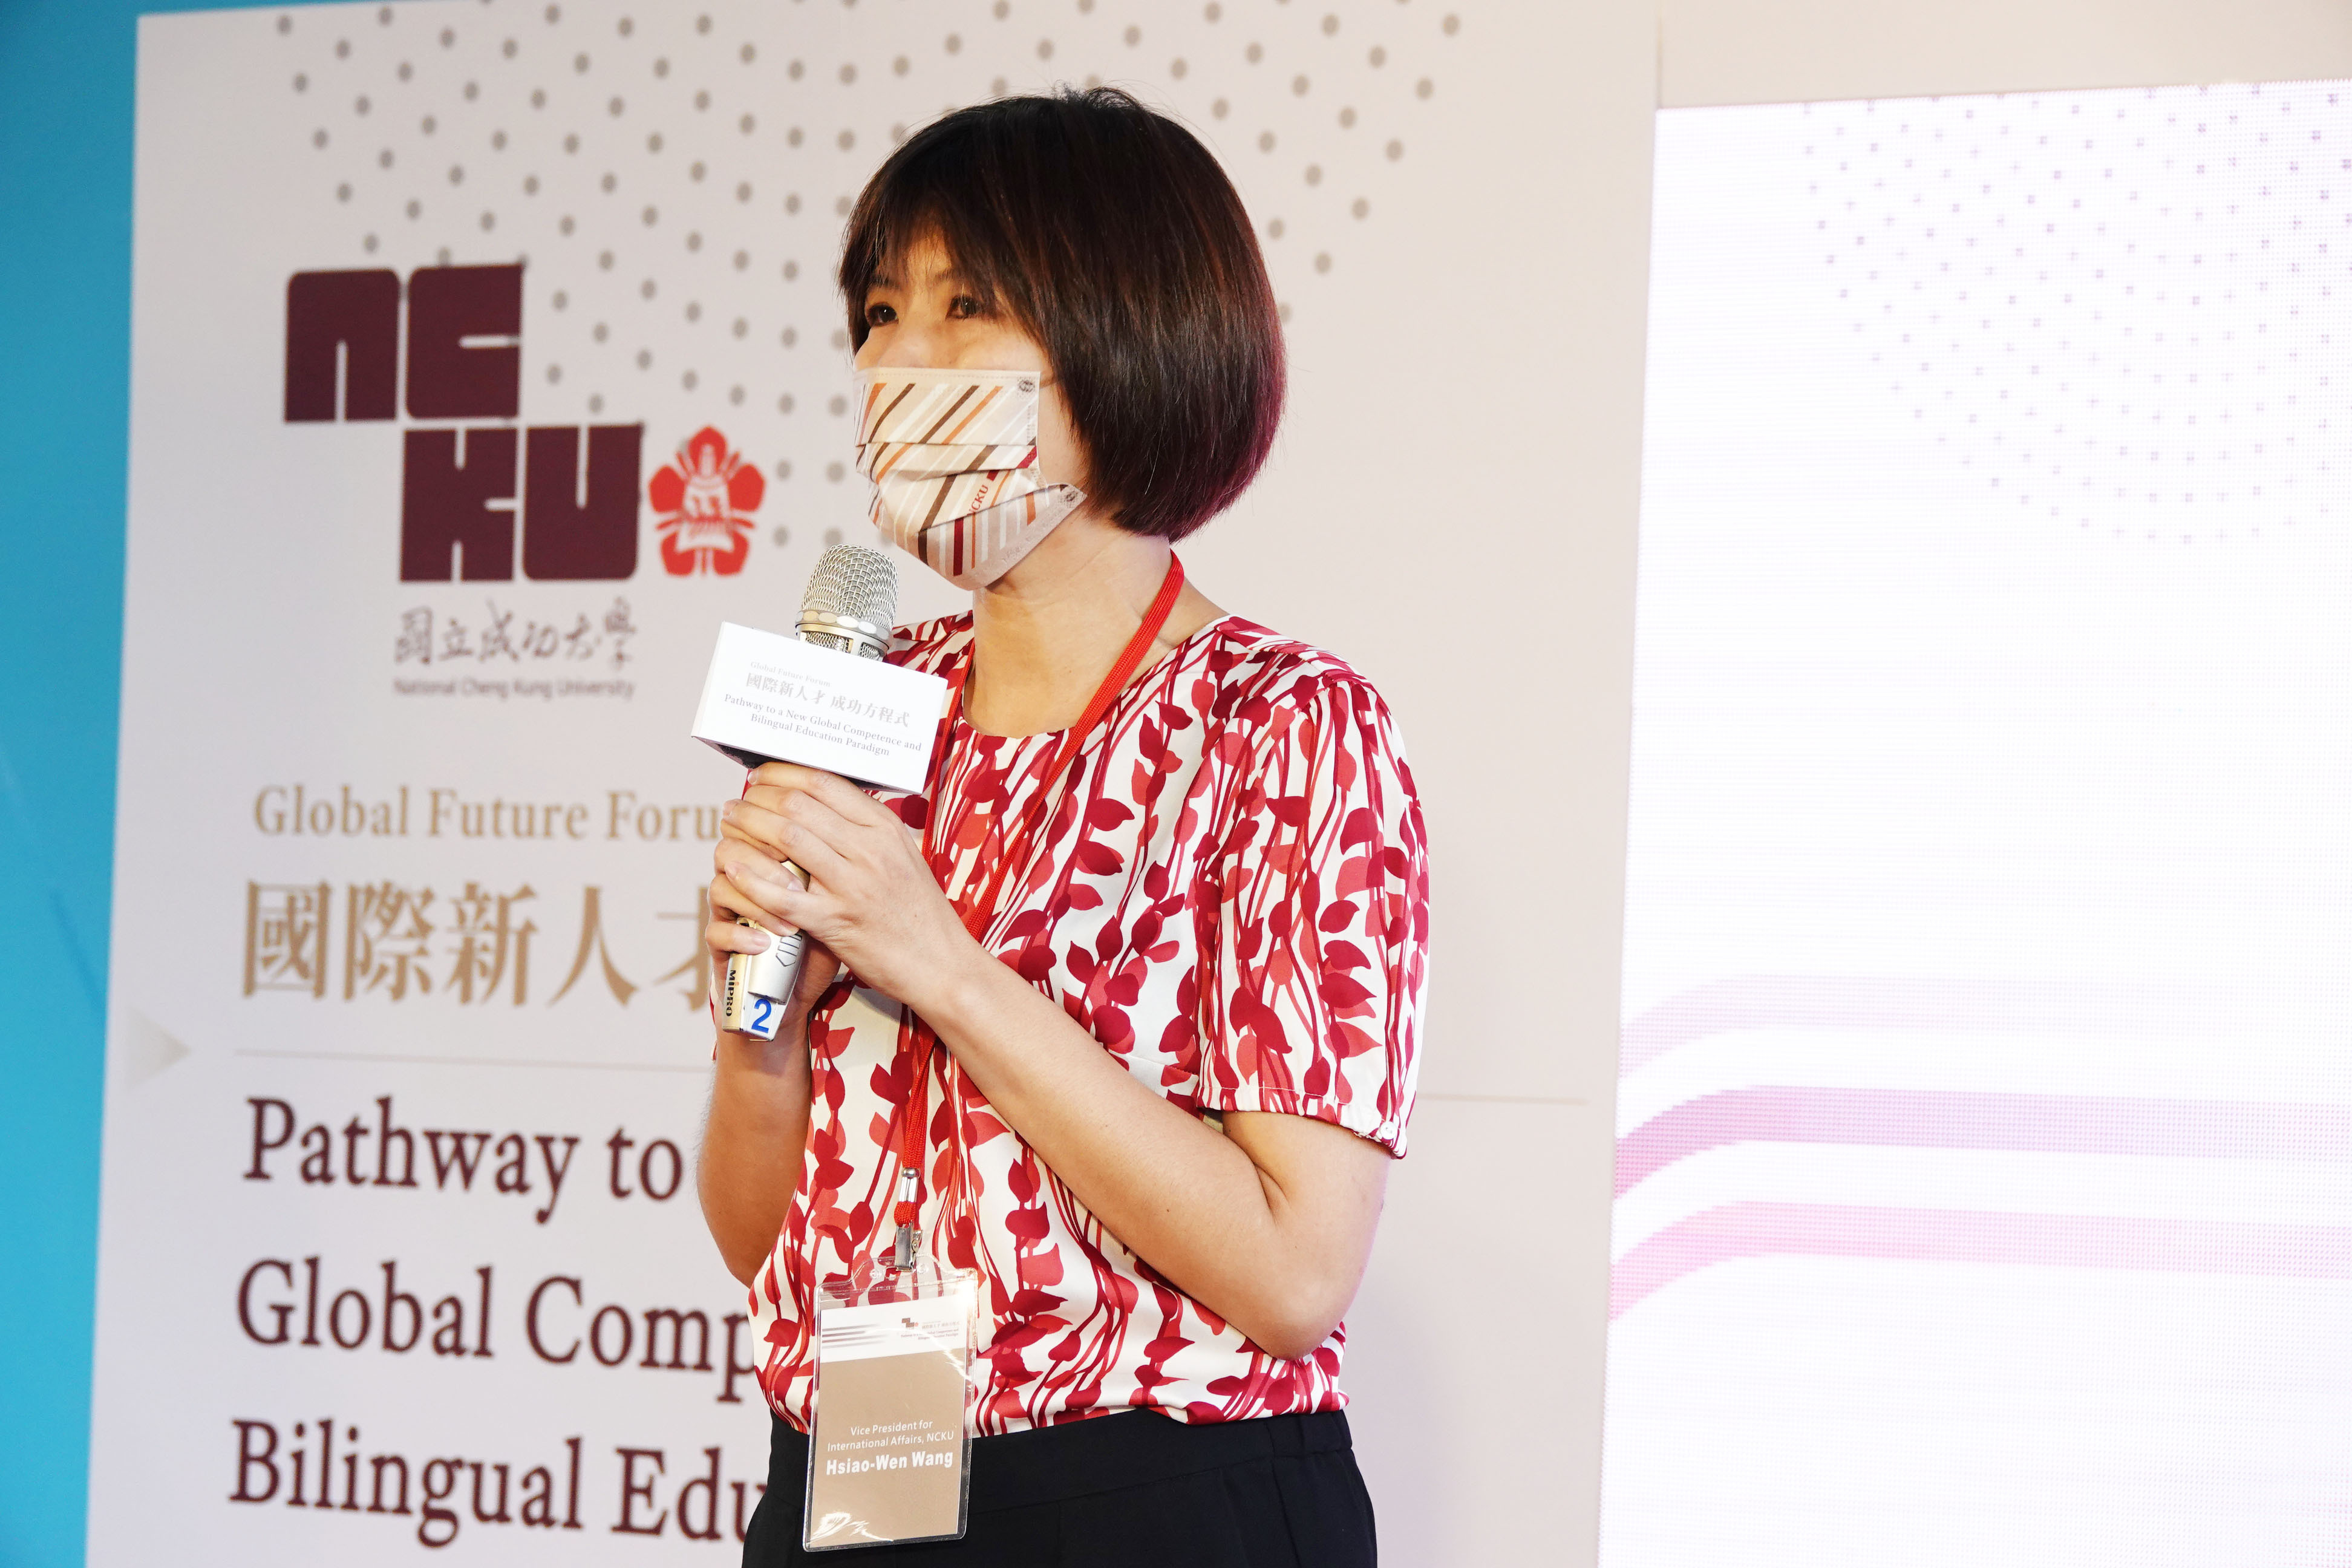 Hsiao-Wen Wang  thanked the participating institutions for their contributions